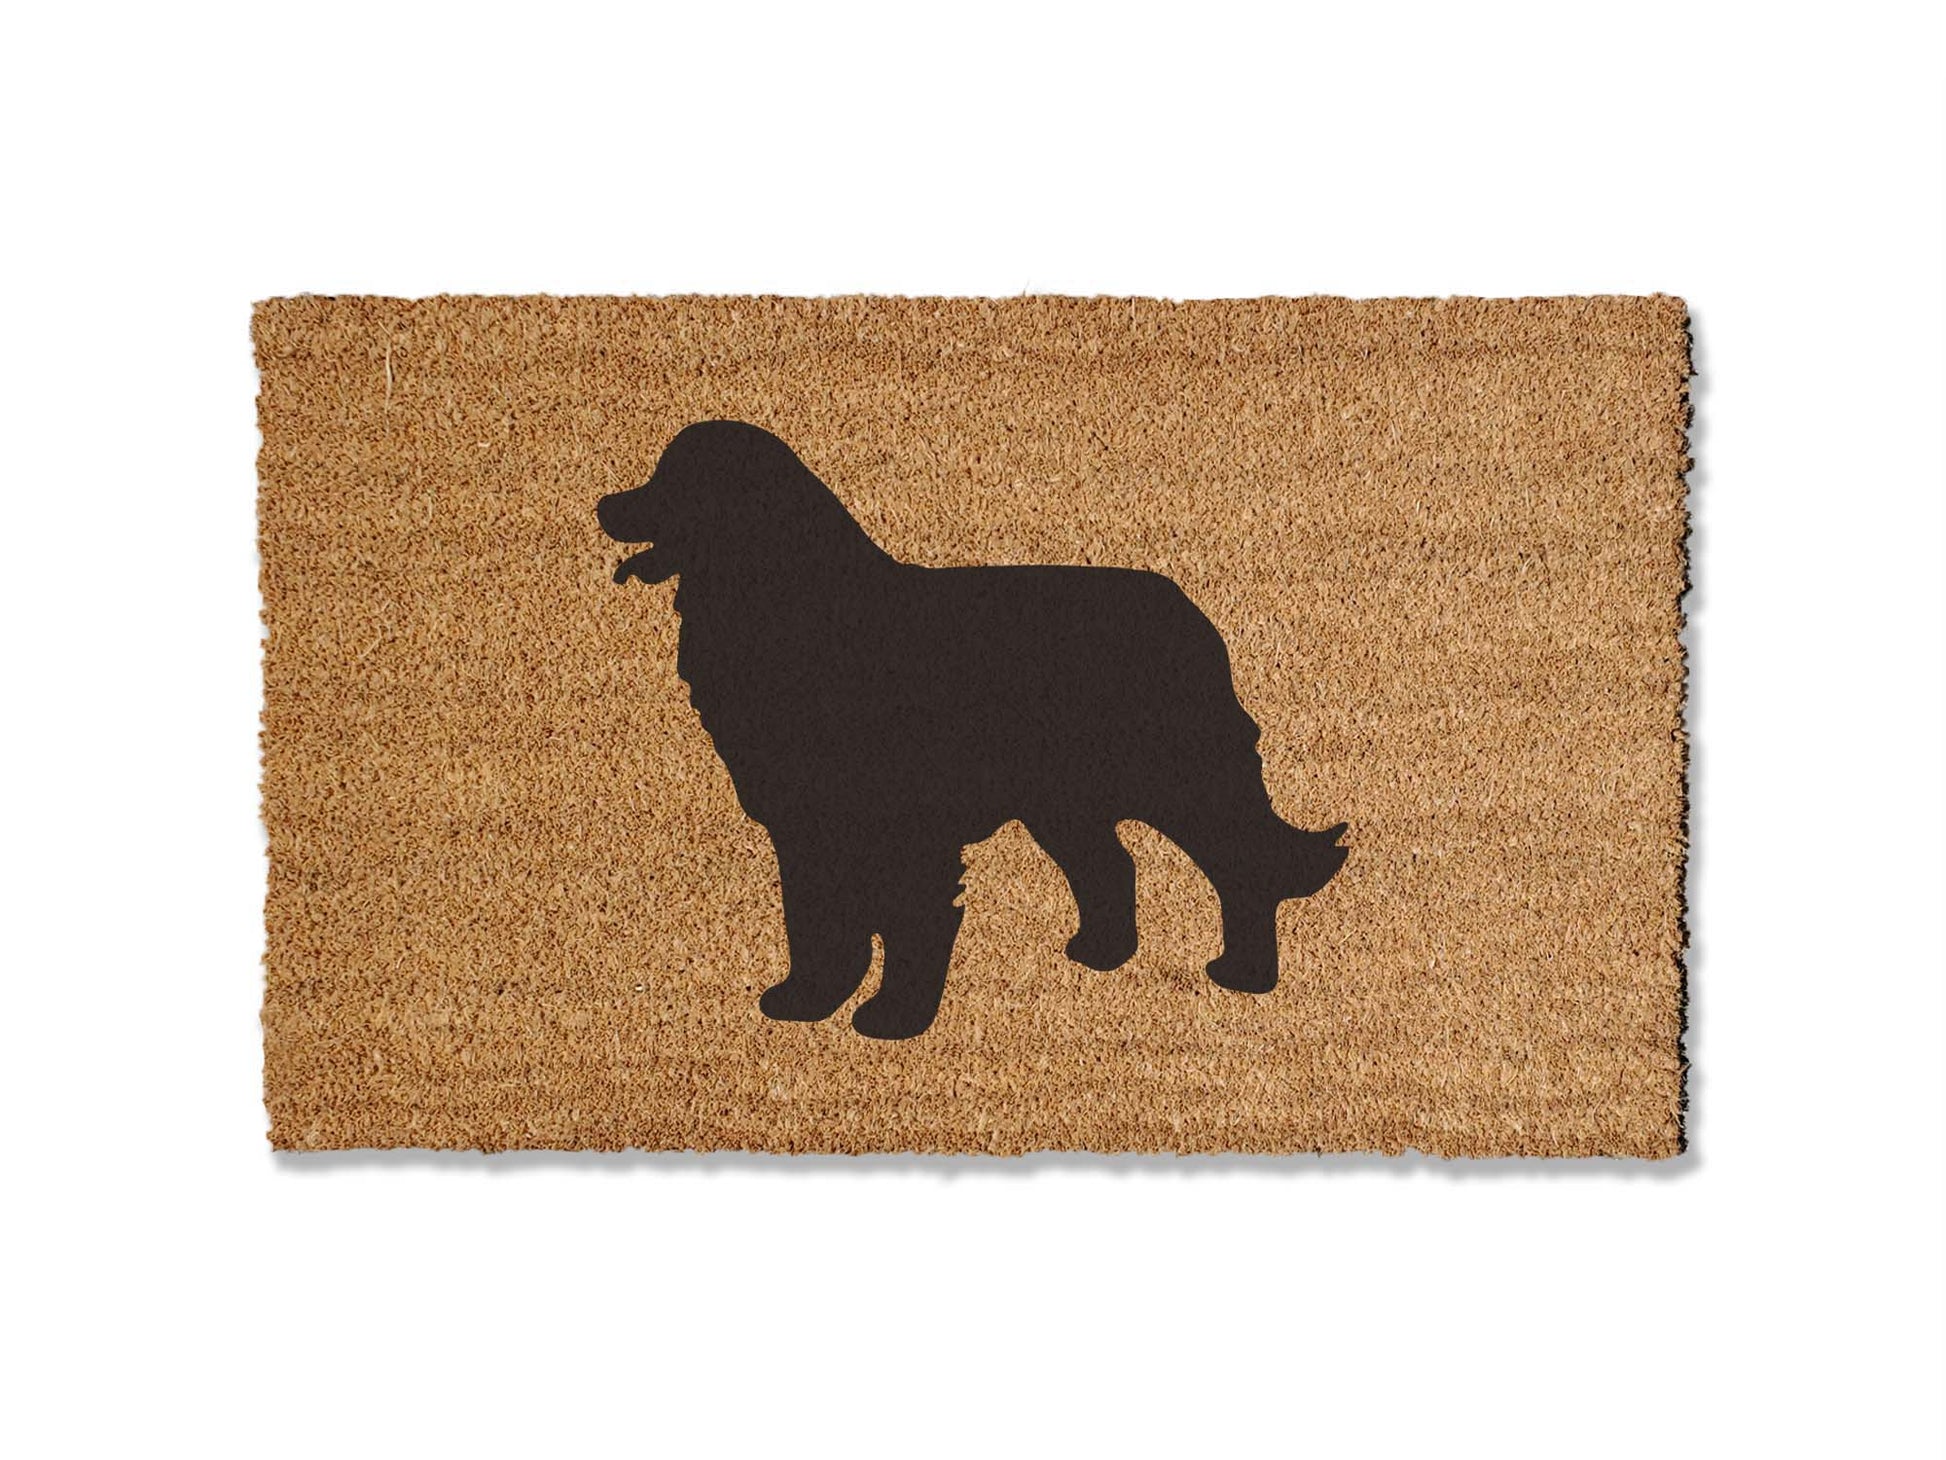 A coir doormat that is 18 inches by 30 inches with the silhouette of a Bernese Mountain Dog painted on it.